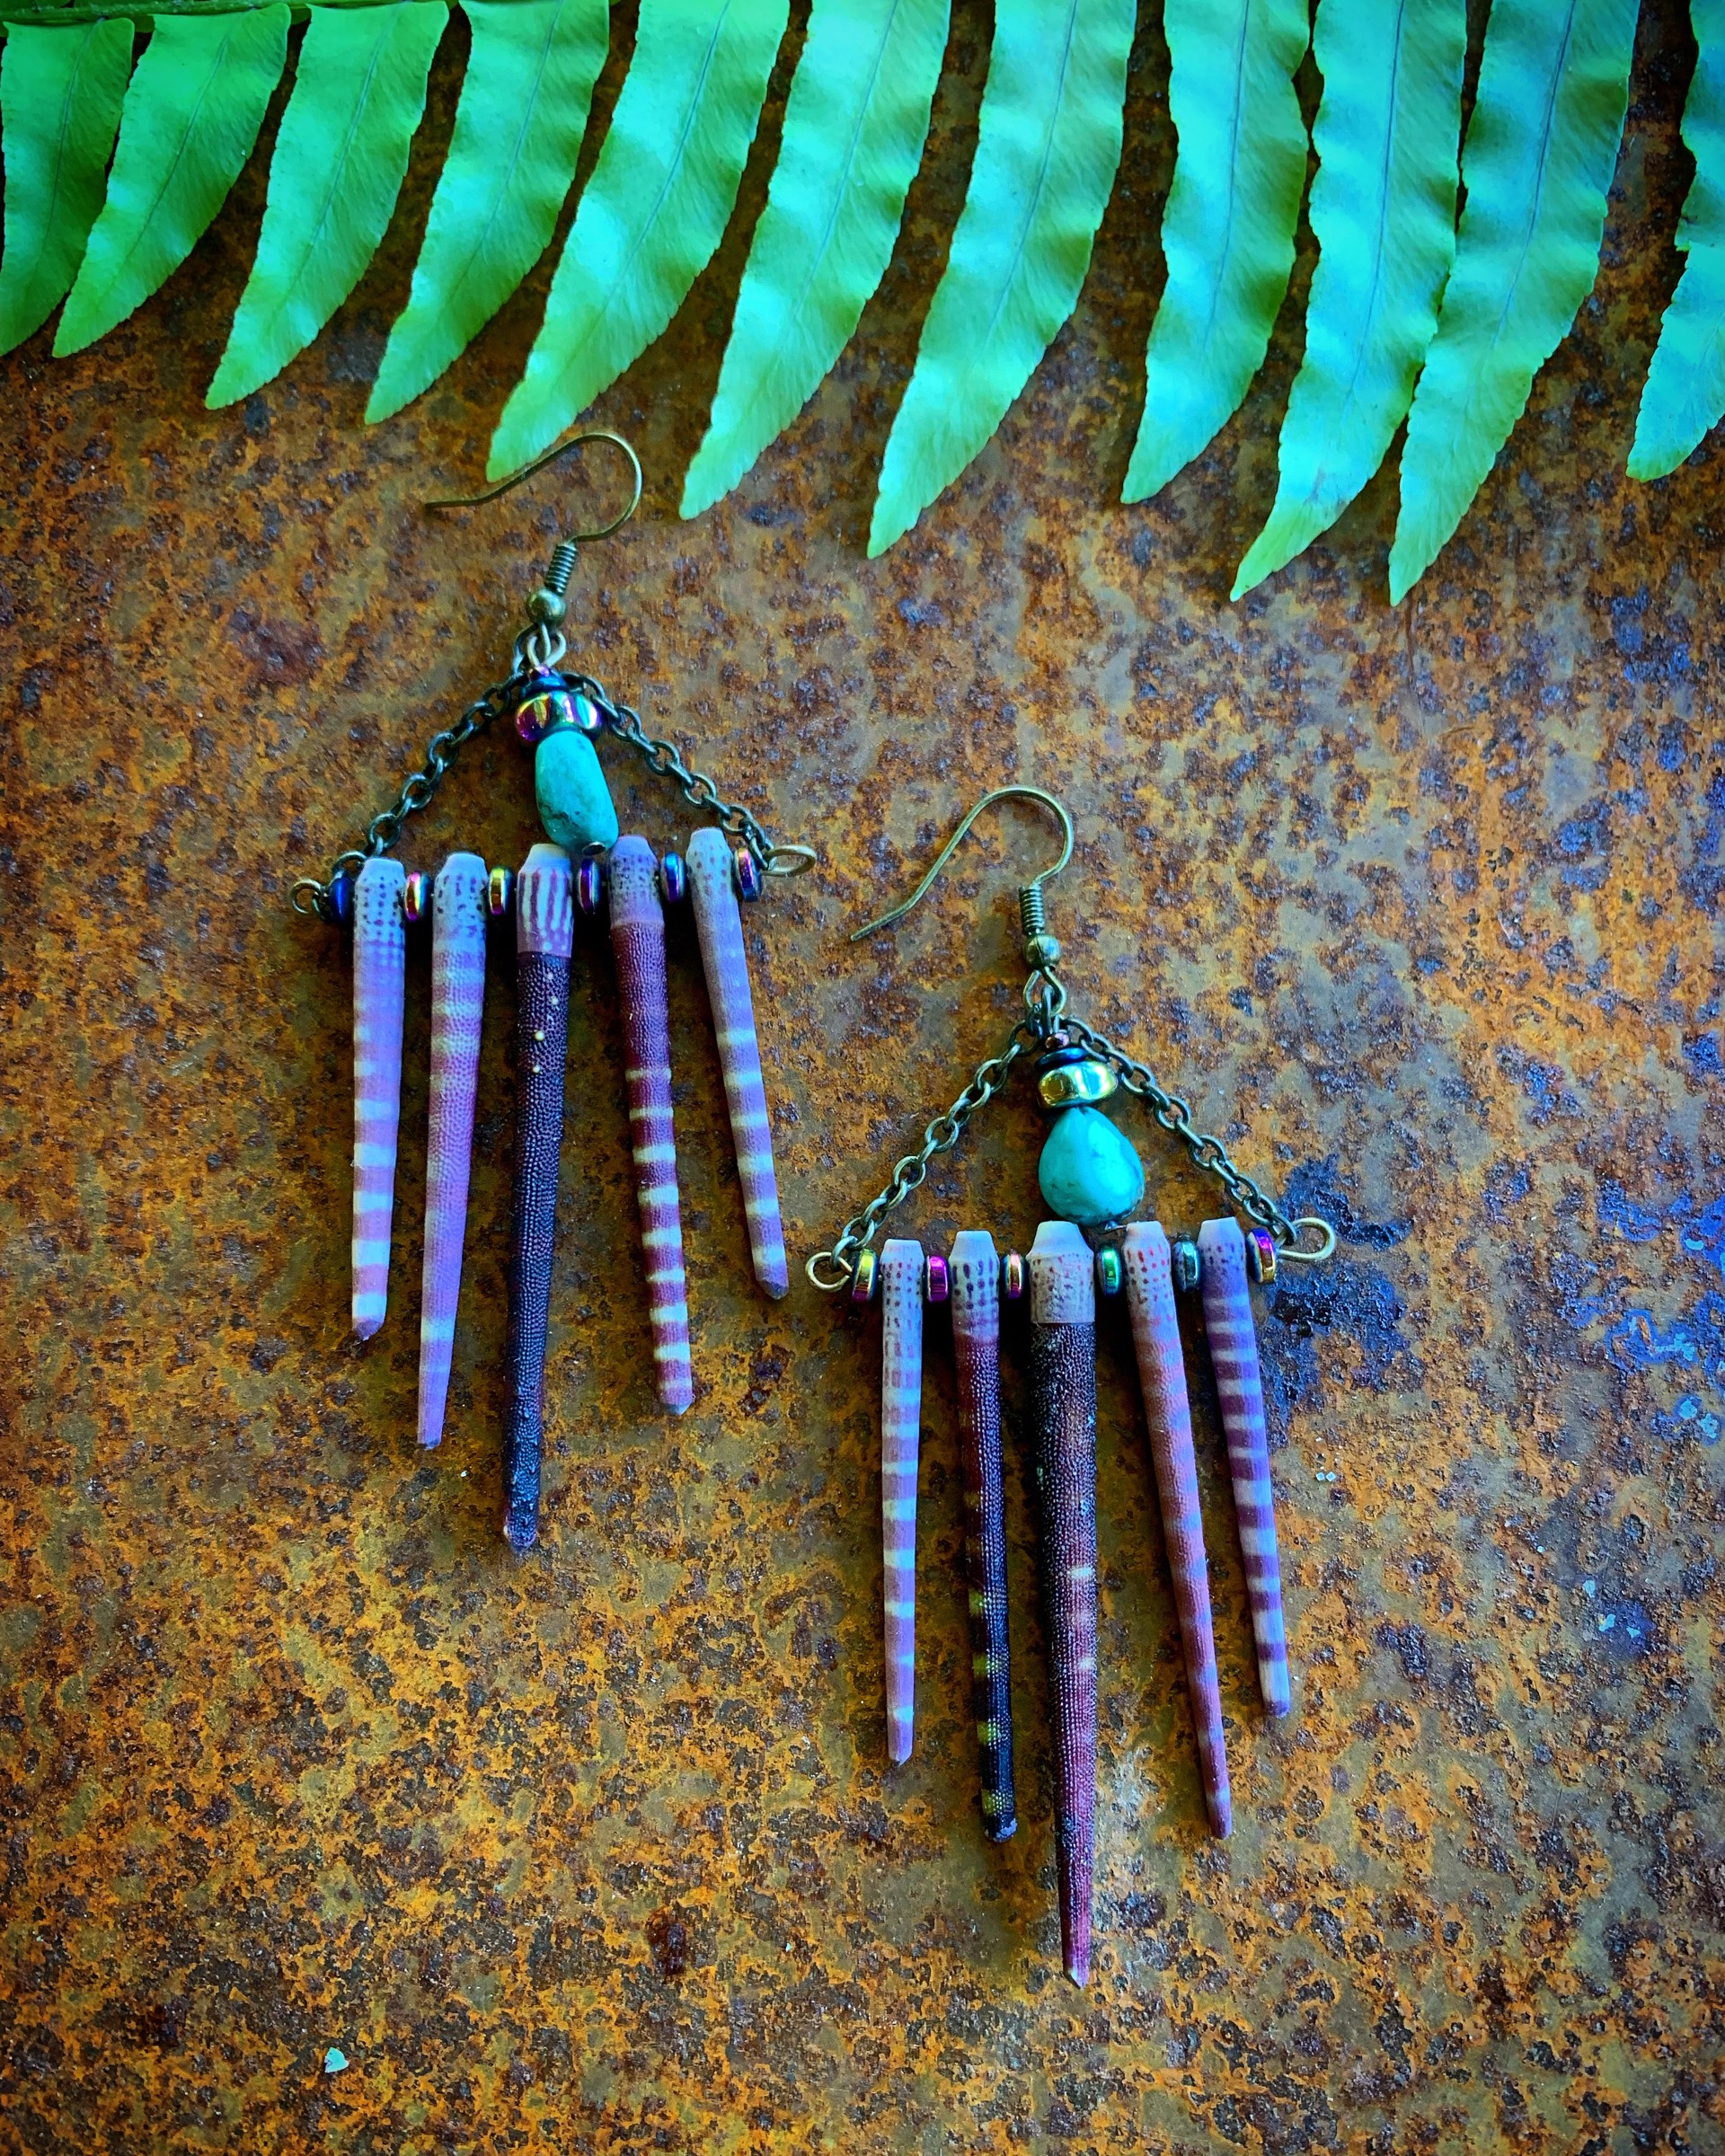 K667 Sea Urchin Spines with Turquoise by Kelly Ormsby